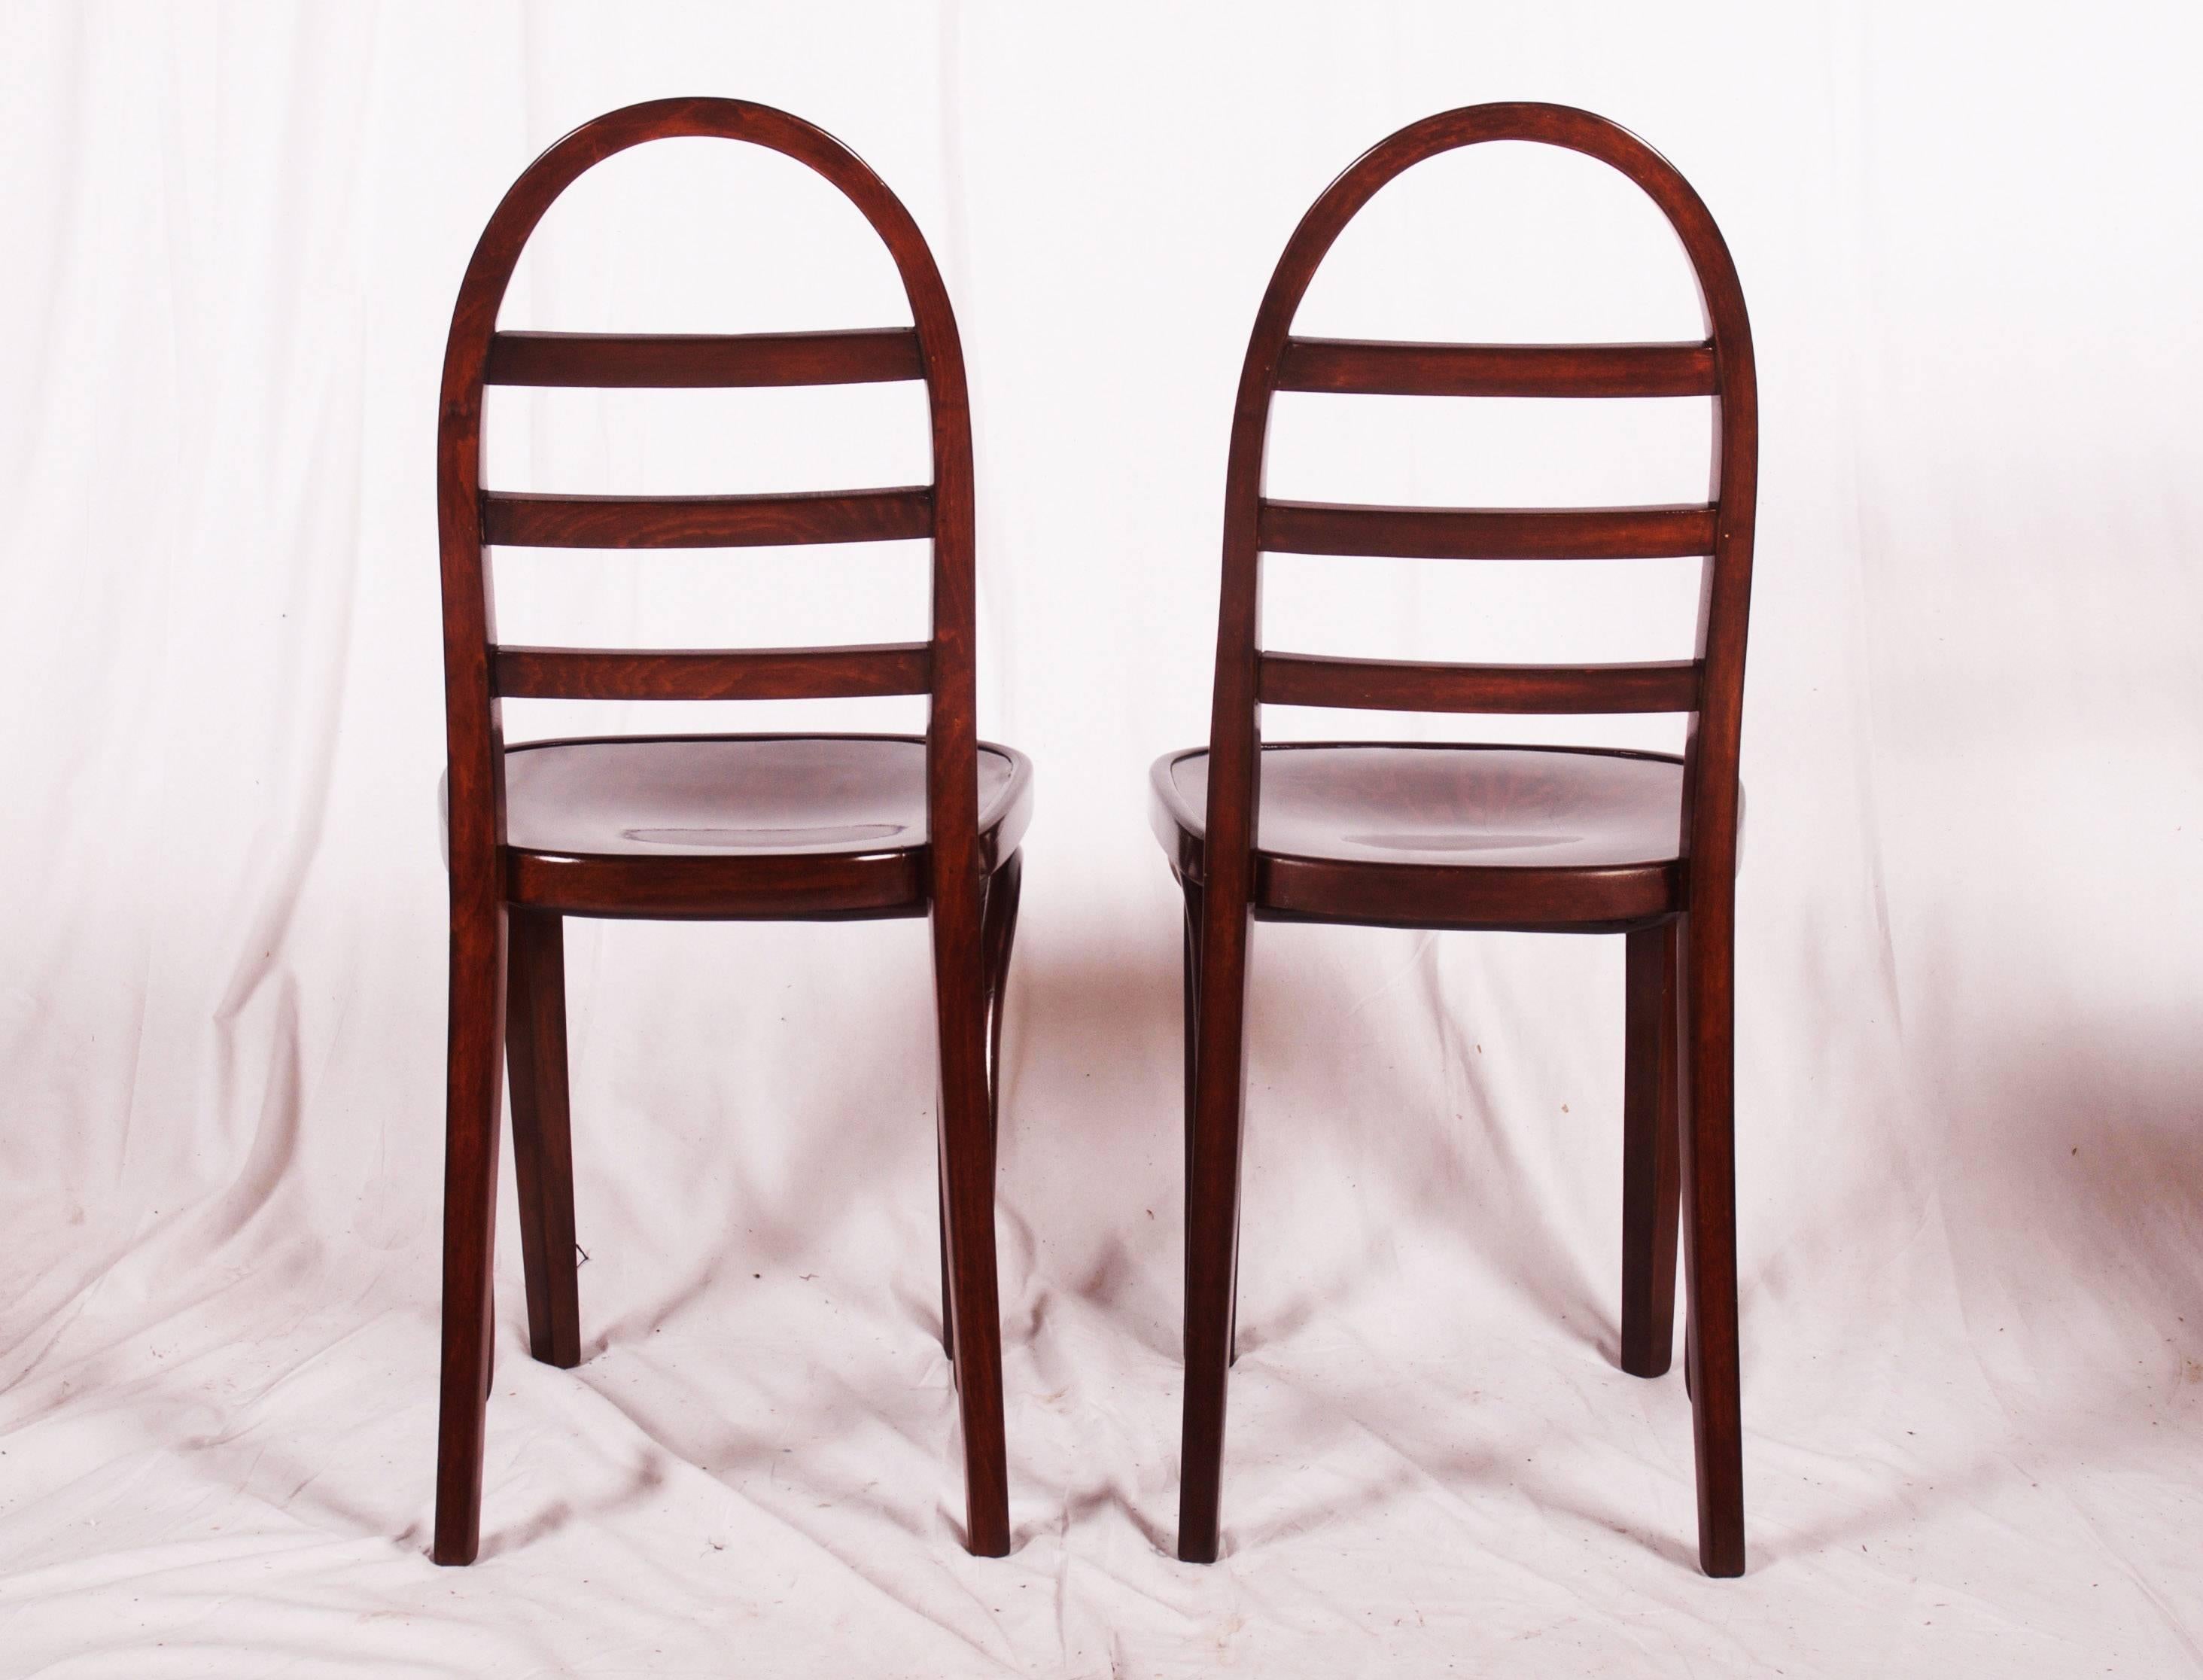 Vienna Secession Pair of Art Deco Thonet Chairs